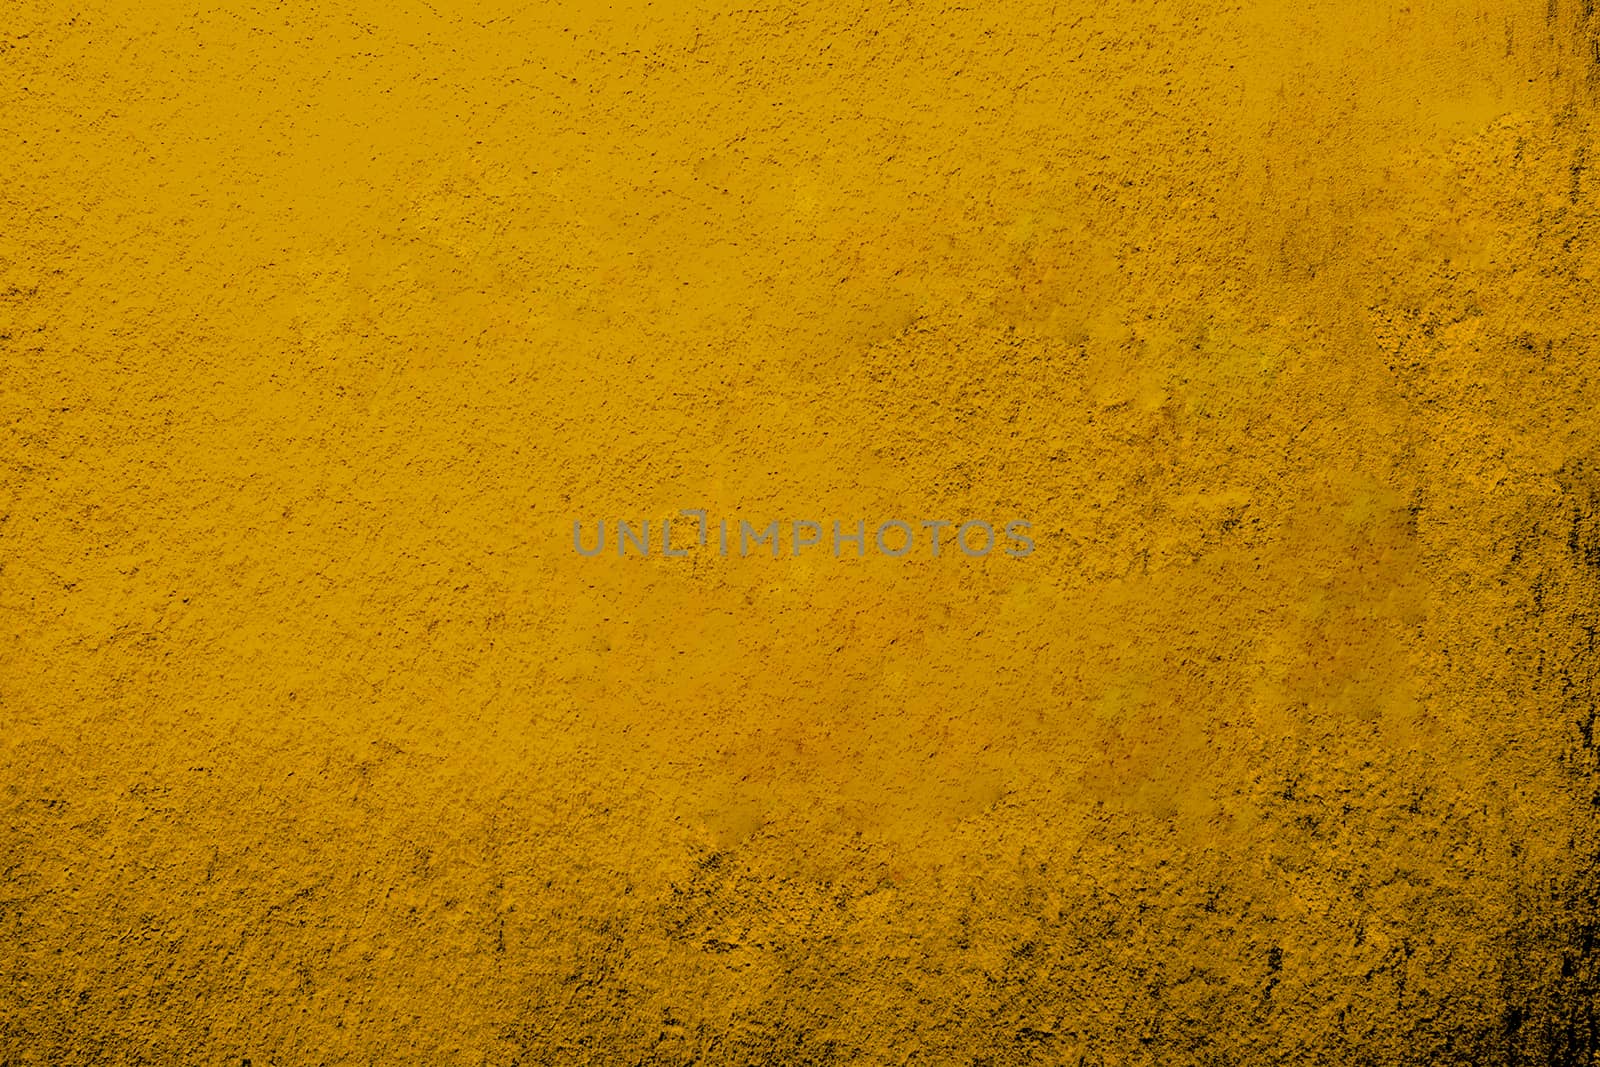 Stucco cement wall, decorative grunge abstract yellow background.  Textured banner stylized wallpaper. by chernobrovin